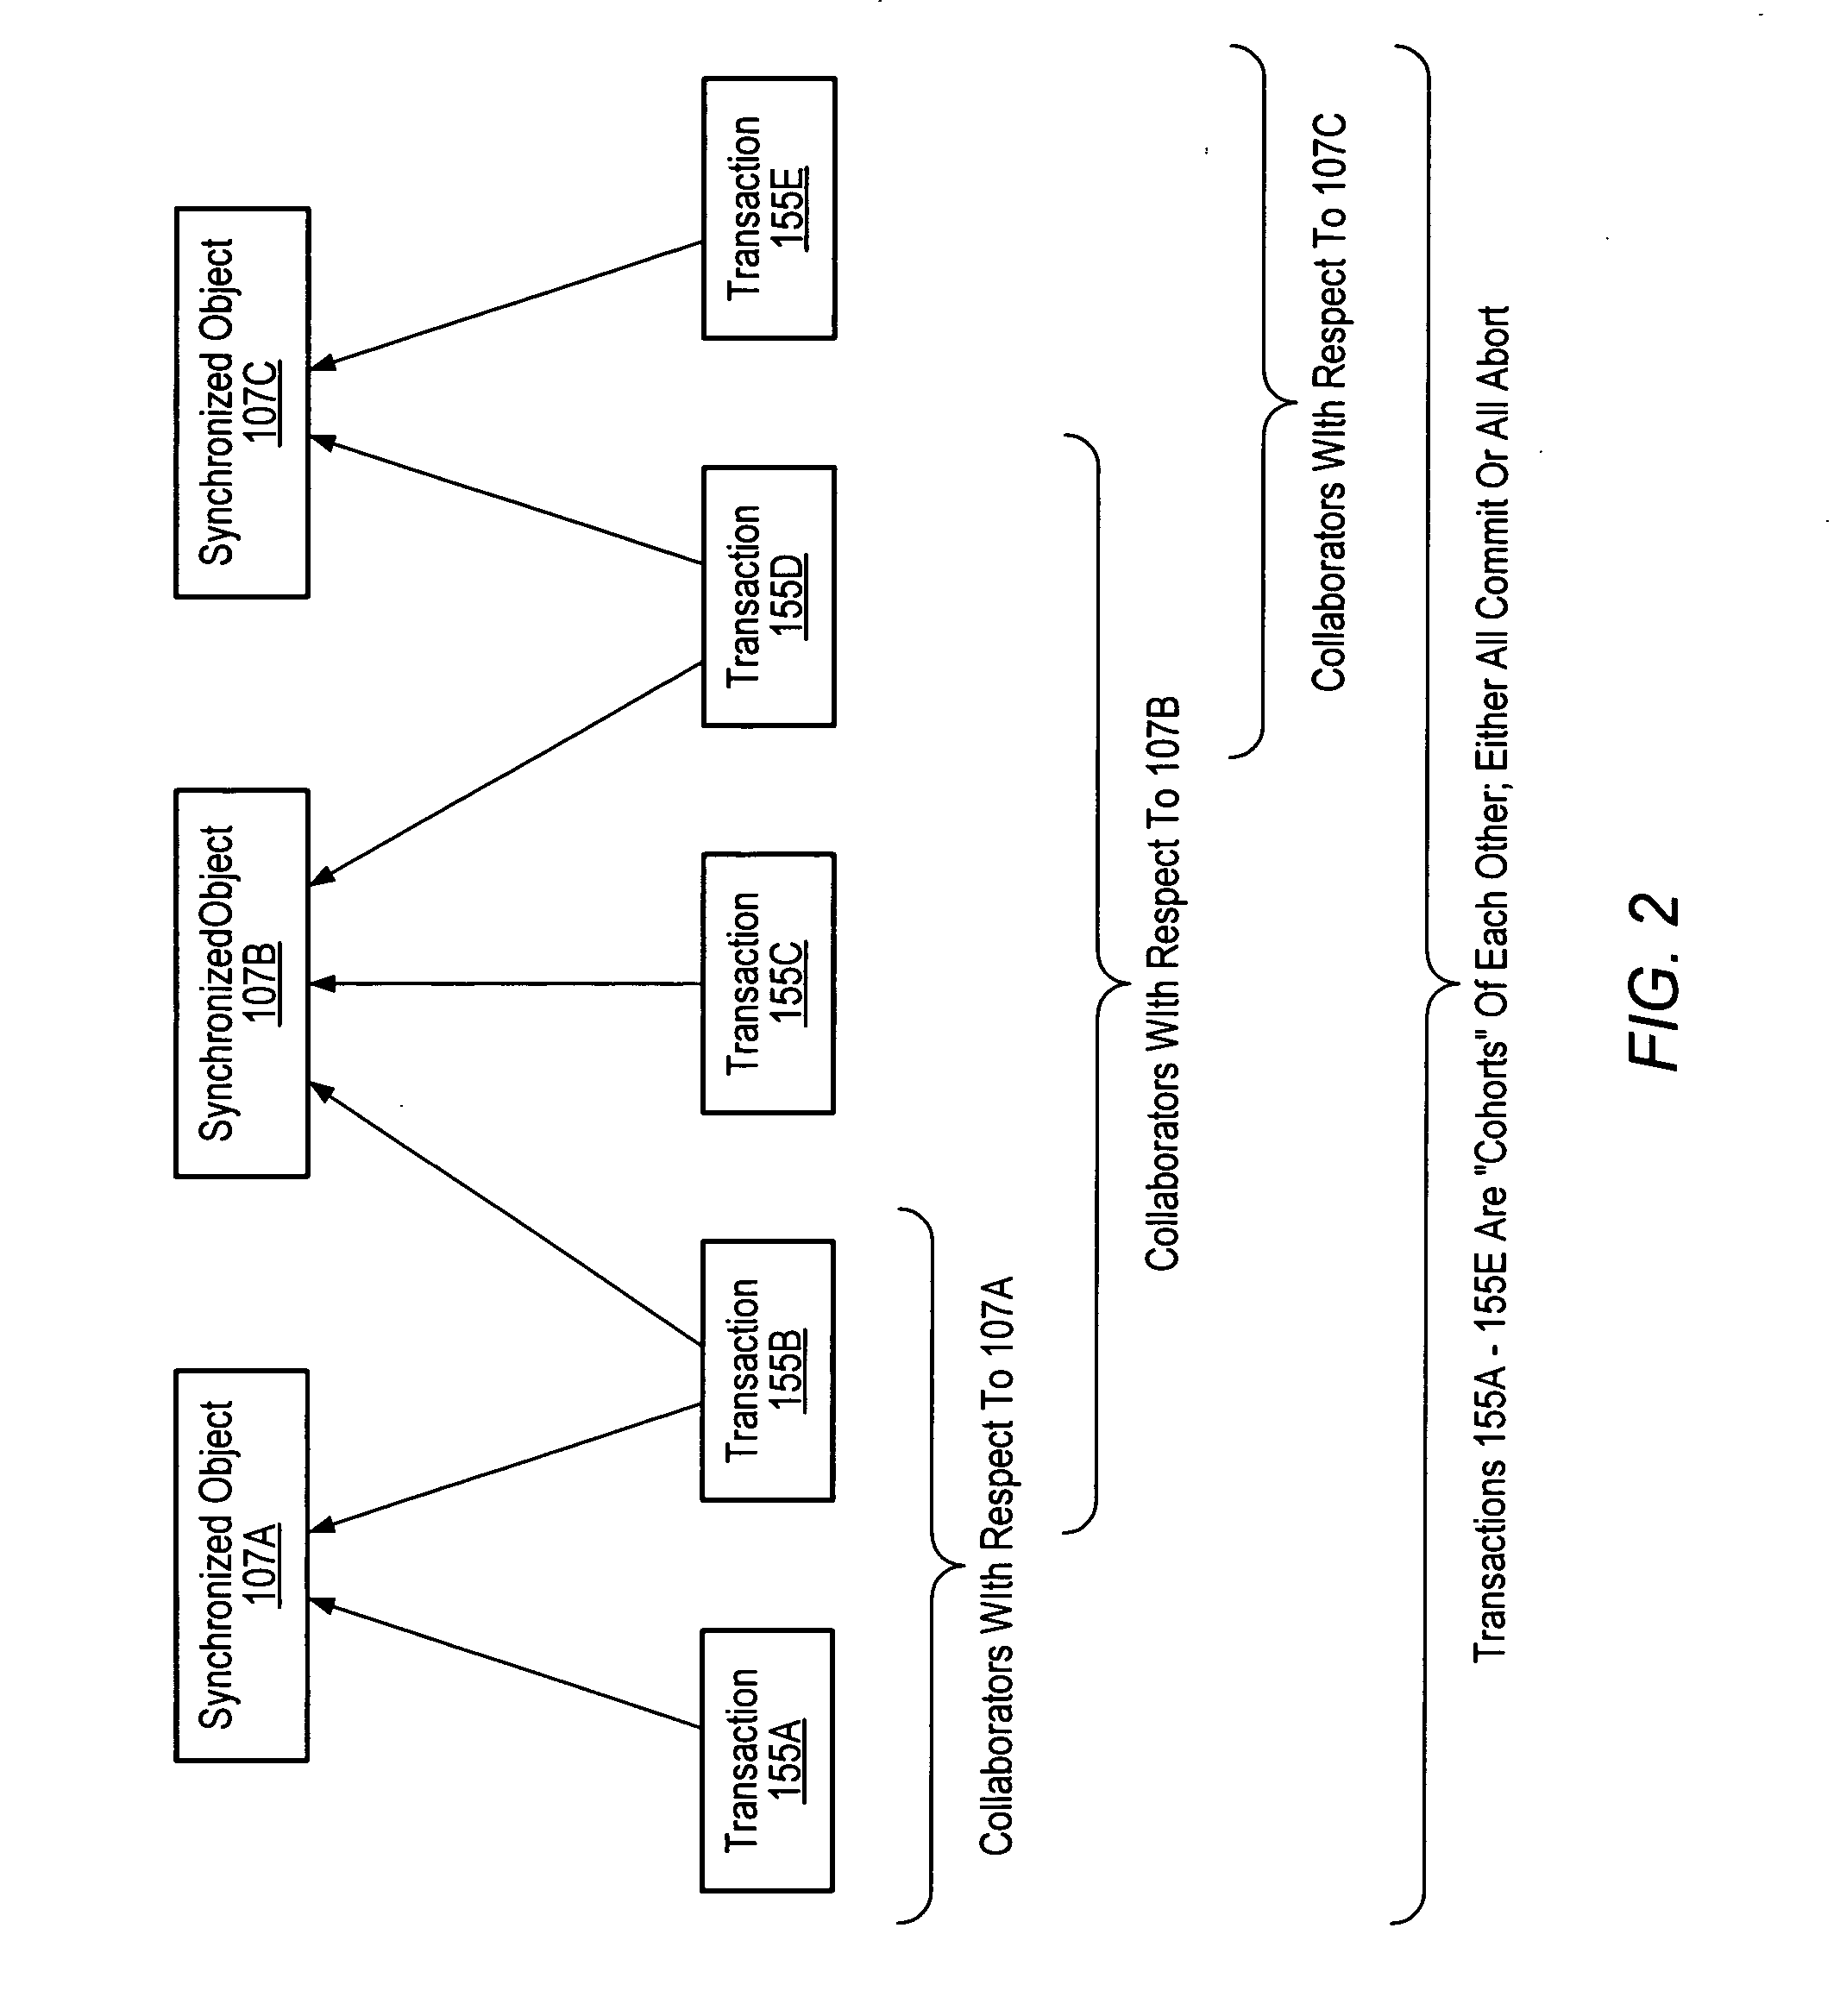 Synchronized objects for software transactional memory